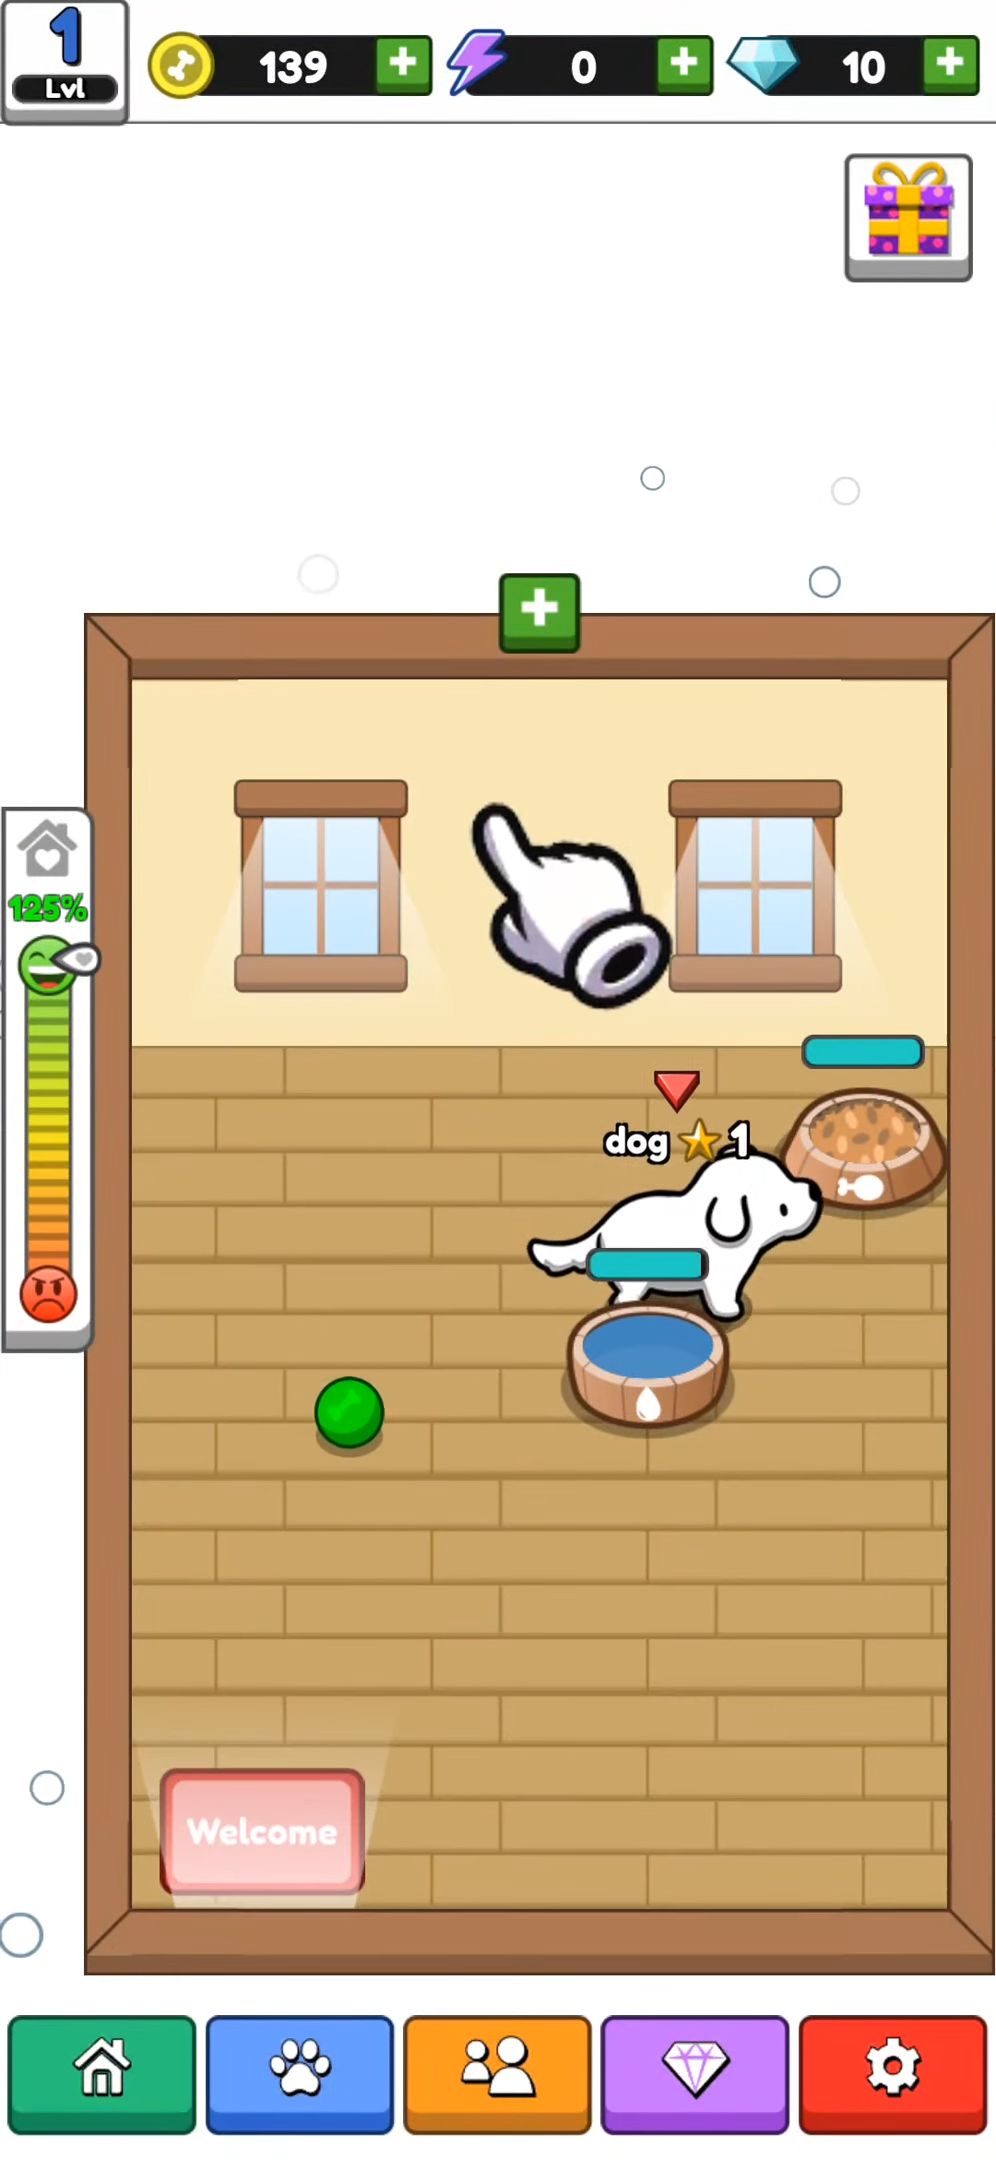 Gameplay of the Pet Idle for Android phone or tablet.